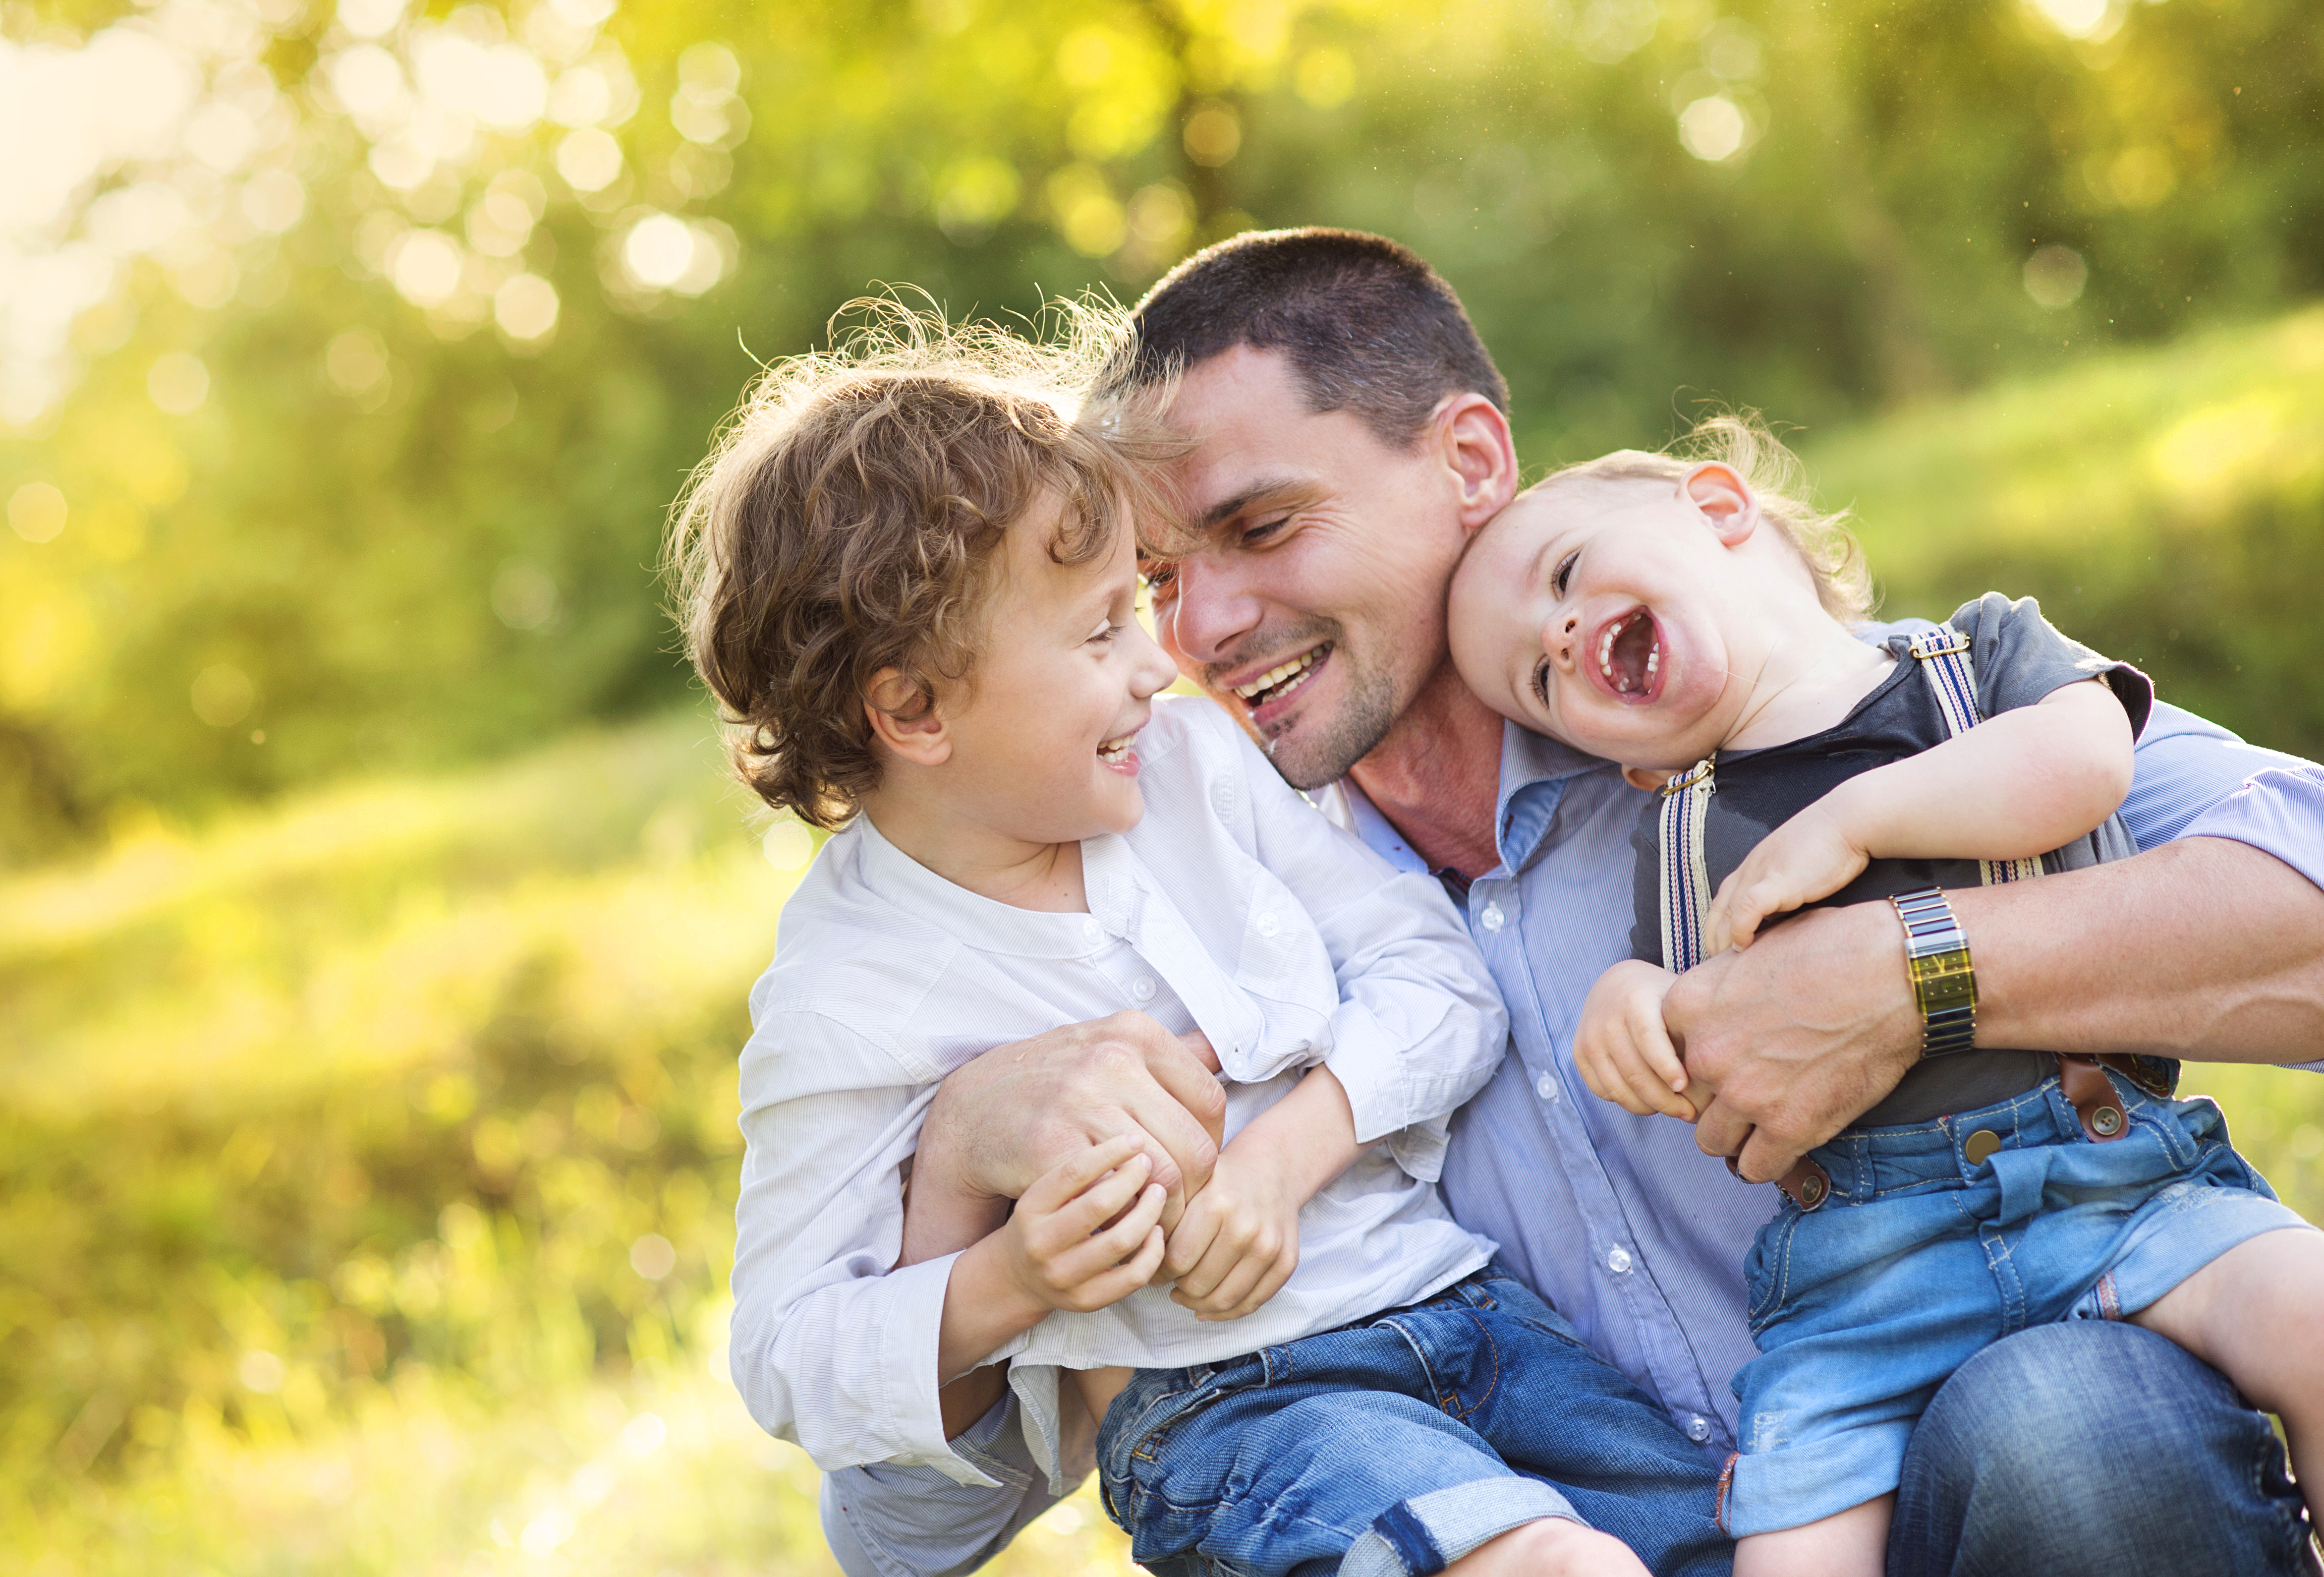 Little boys and their dad | Source: Shutterstock